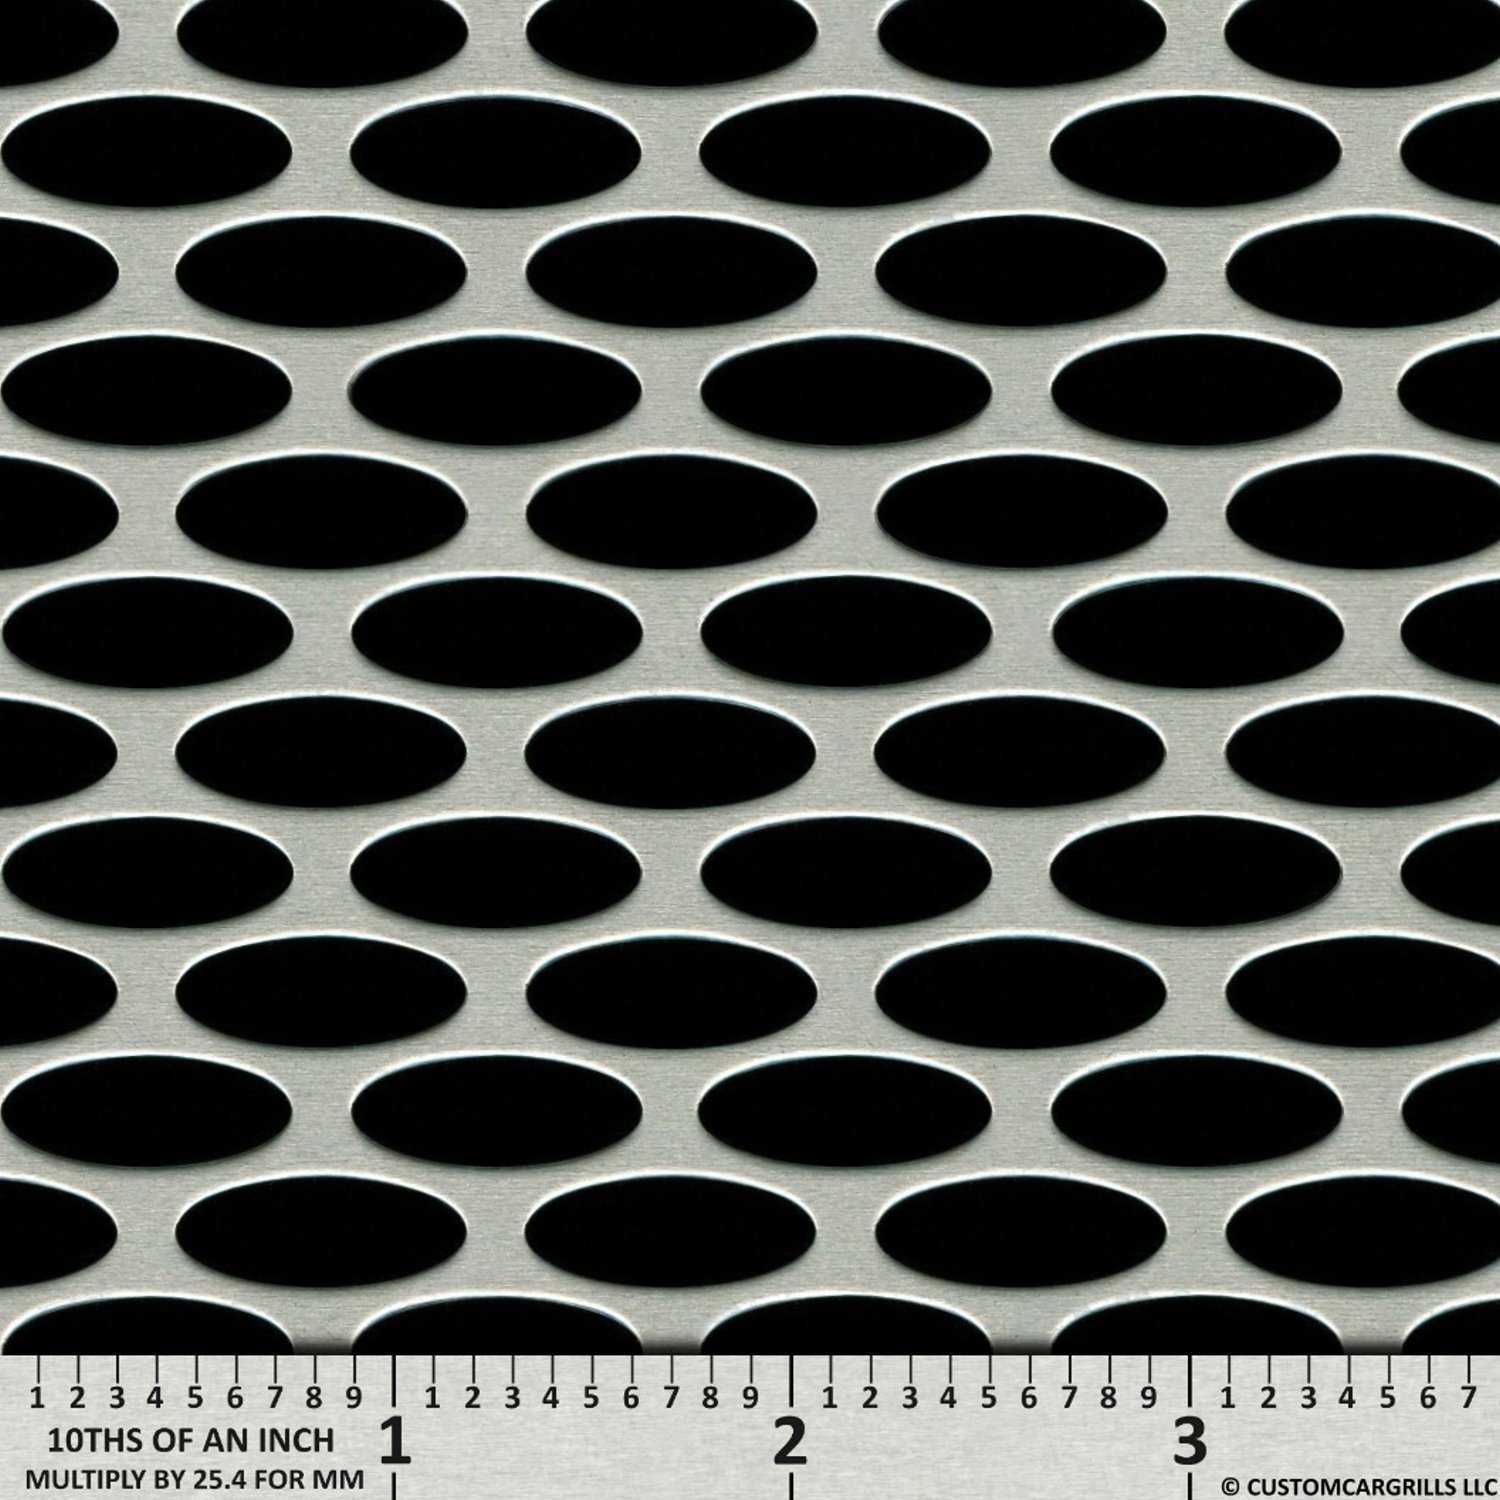 6in. x 36in. "Halo" Aluminum Grill Mesh Sheet - Silver